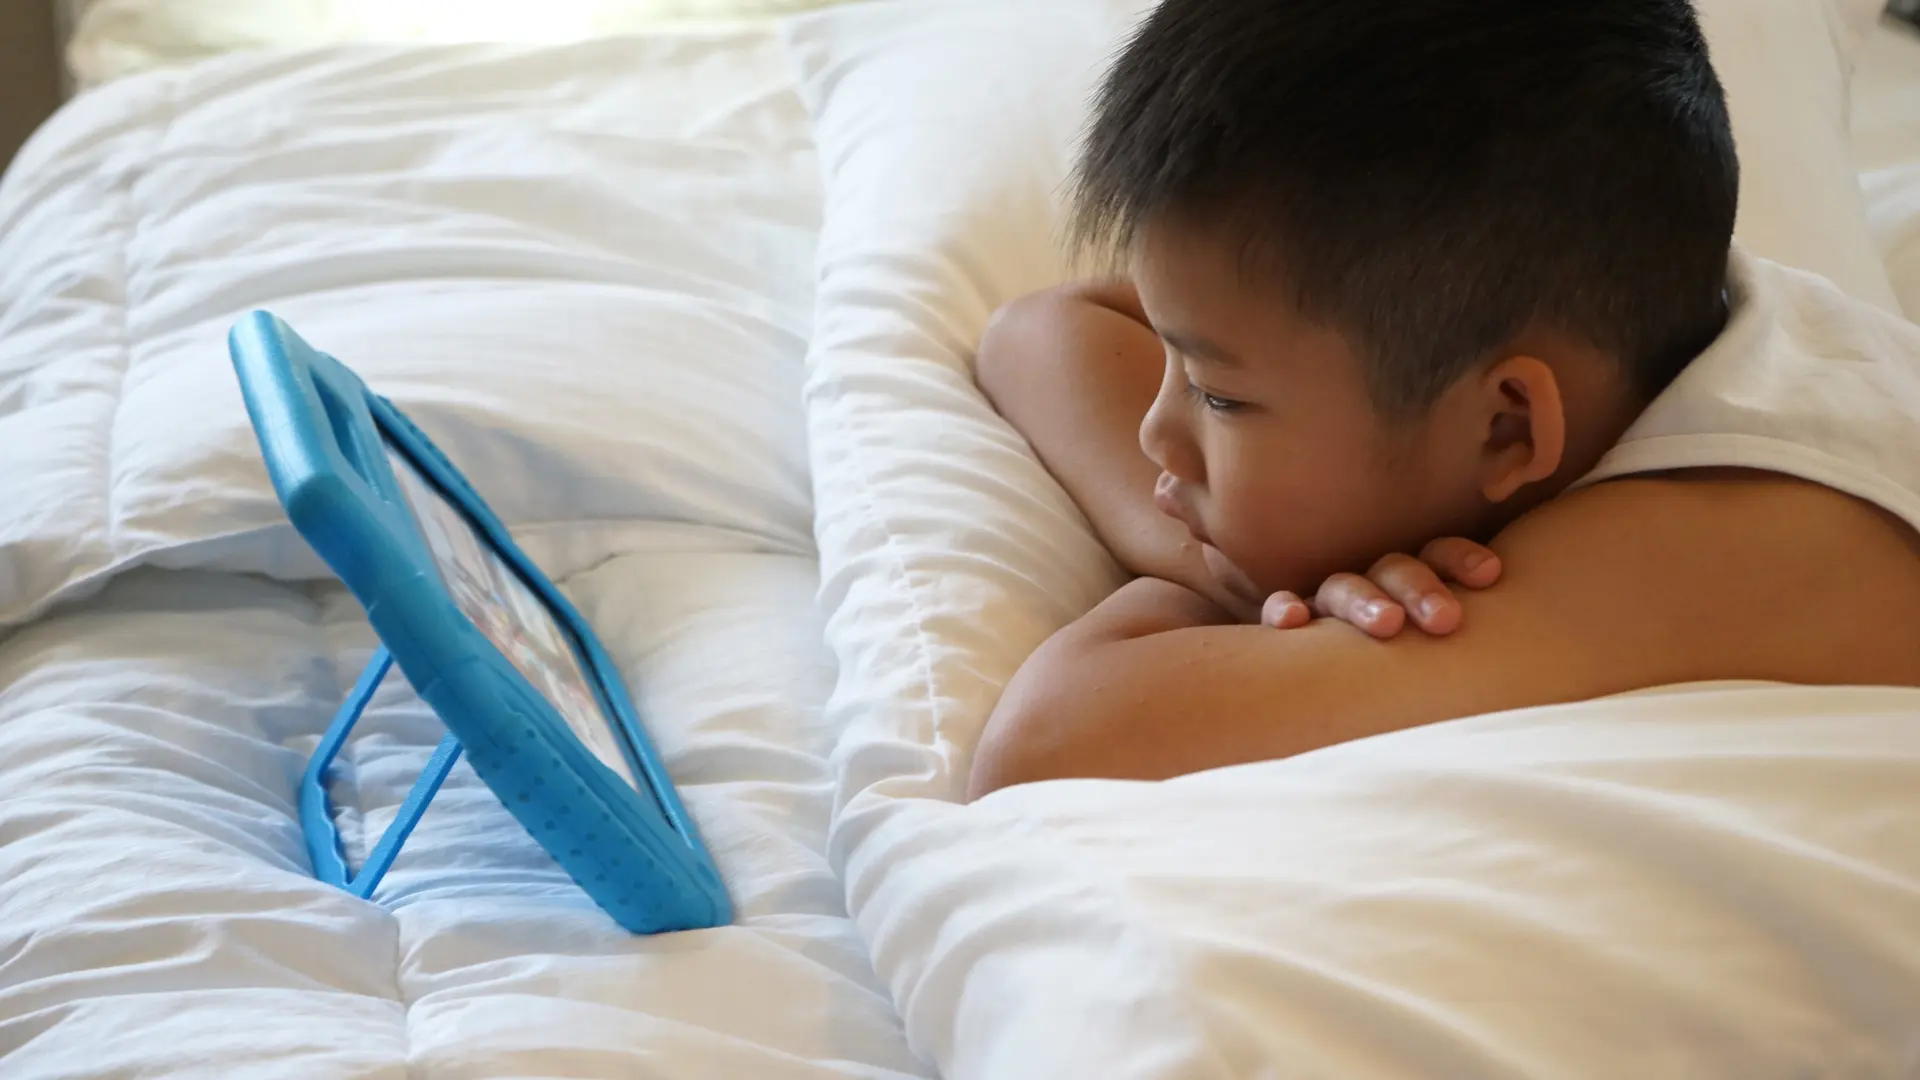 The Effects of Childrens Screen Time on Their Behavior